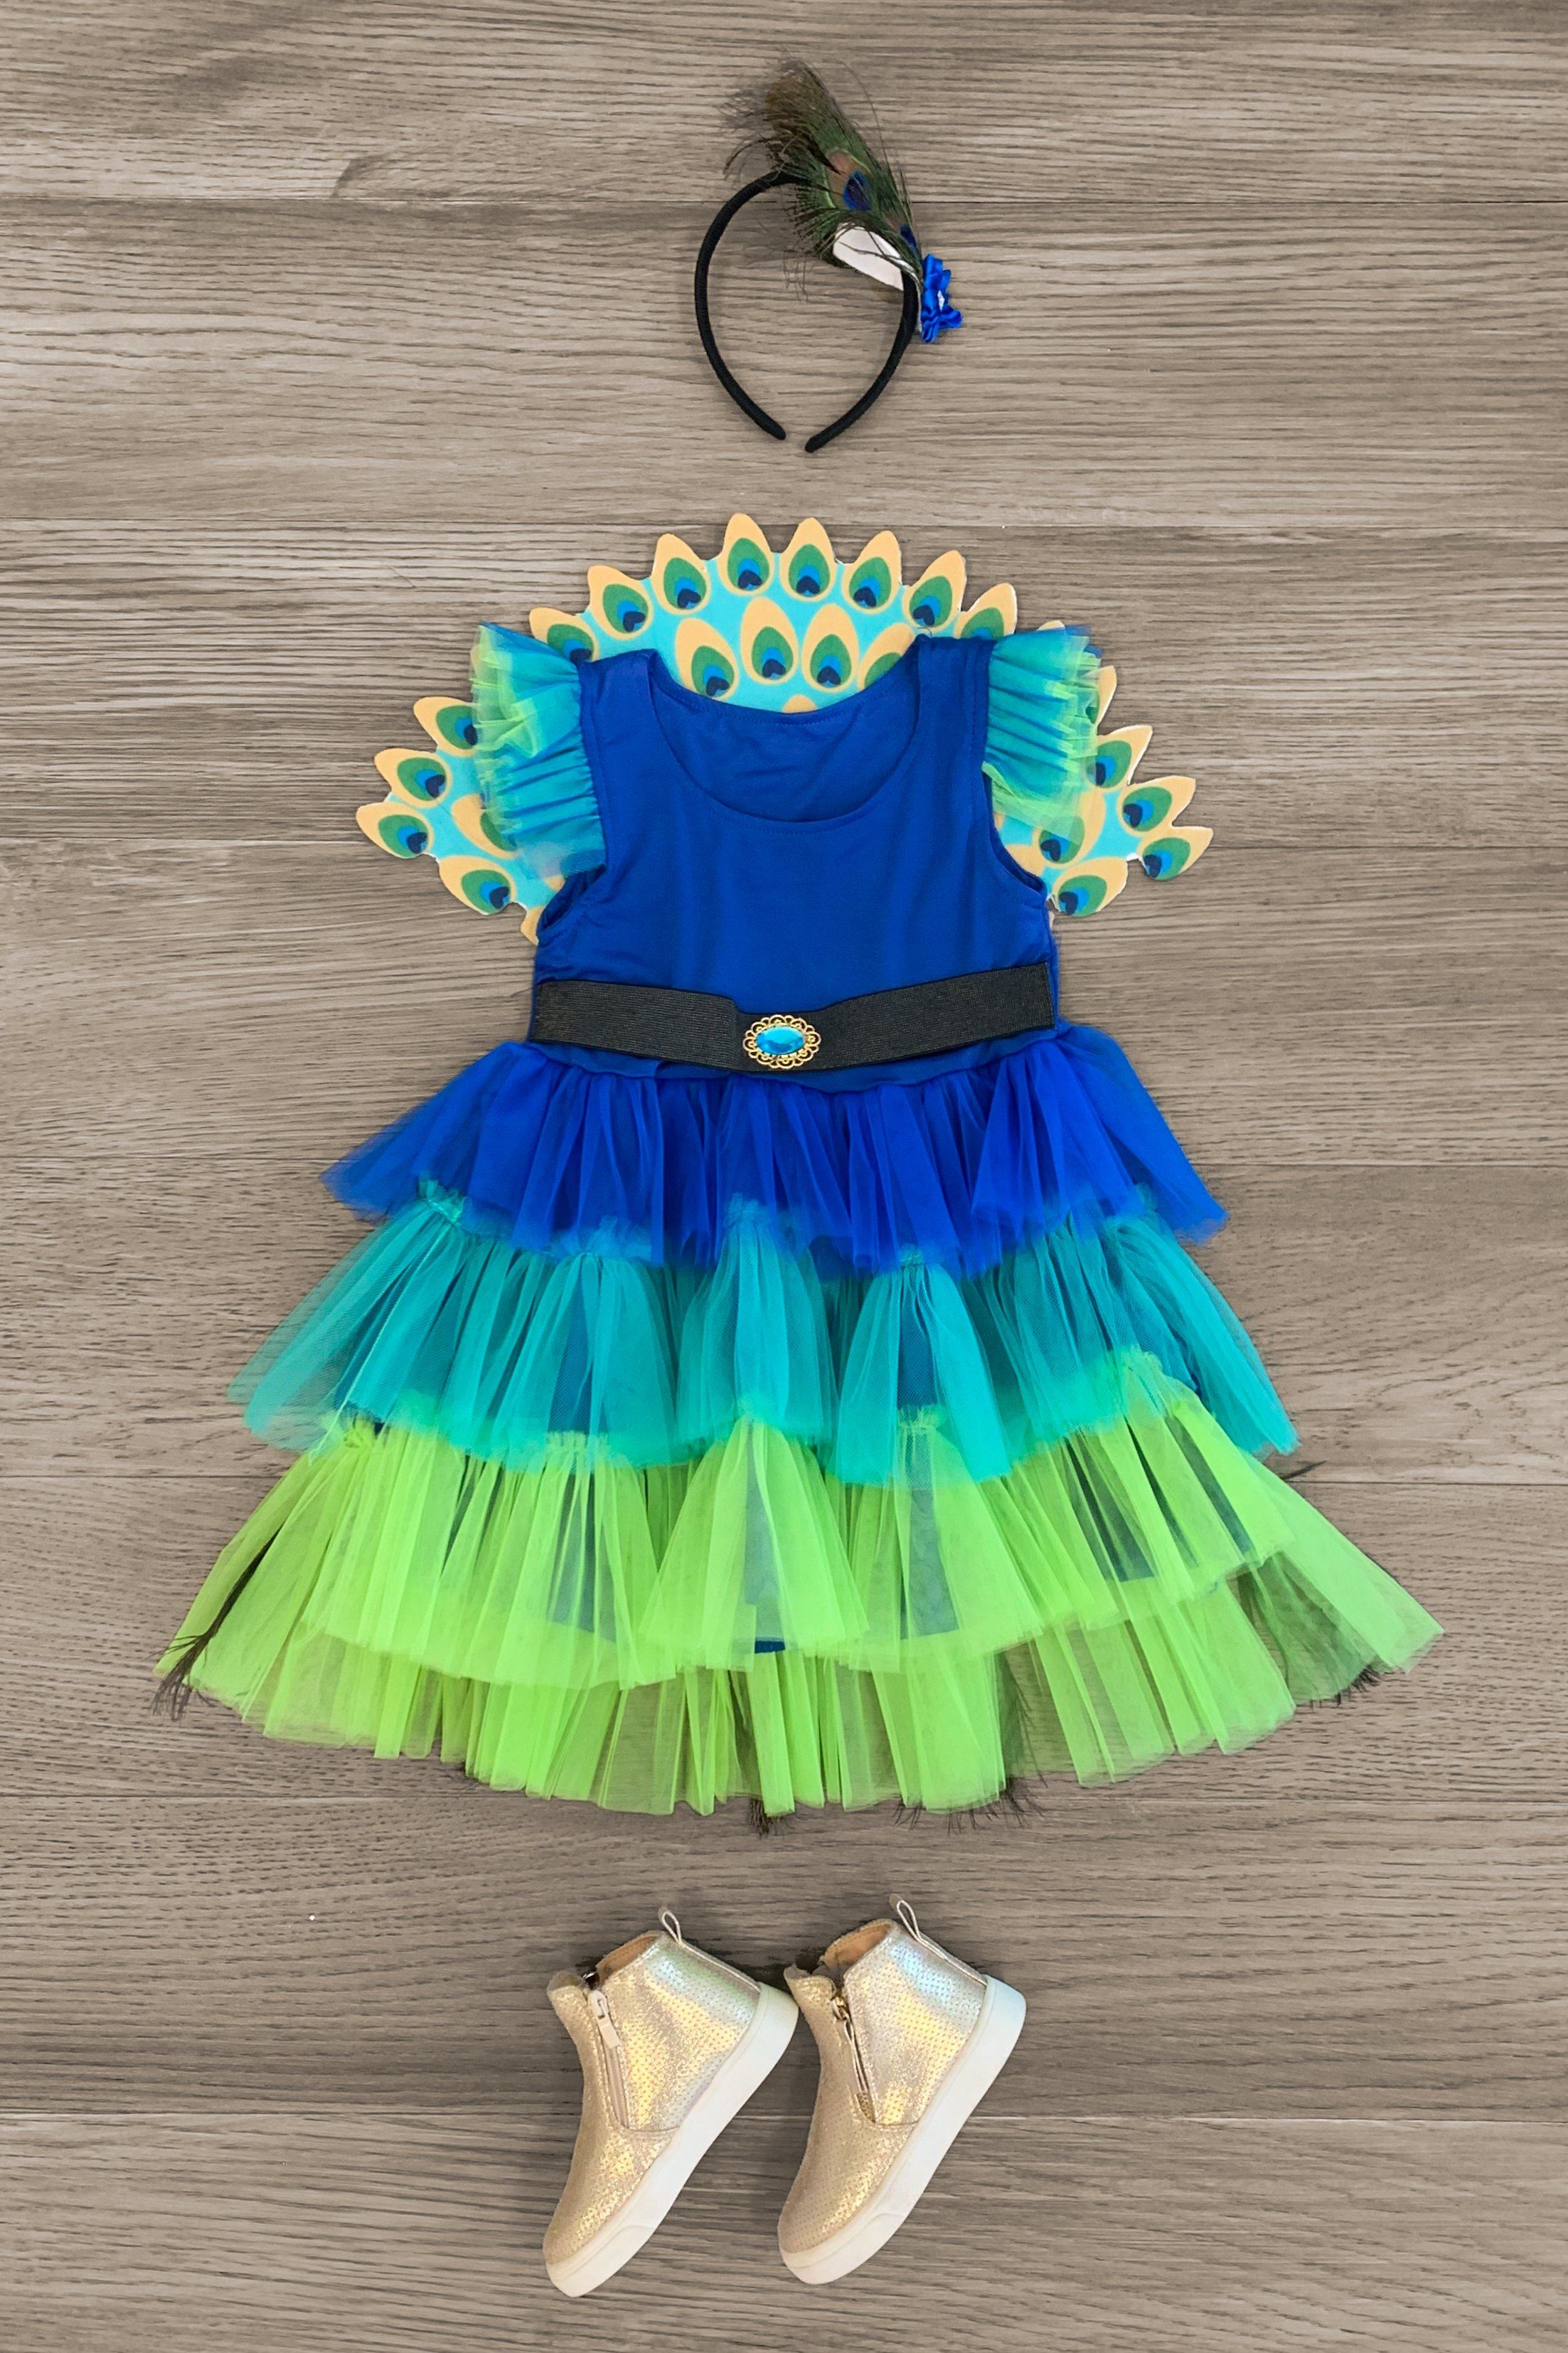 Baby Peacock Tutu Dress Infant Girls Mermaid Crochet Tulle Dress with  Hairbow Children Birthday Party Costume